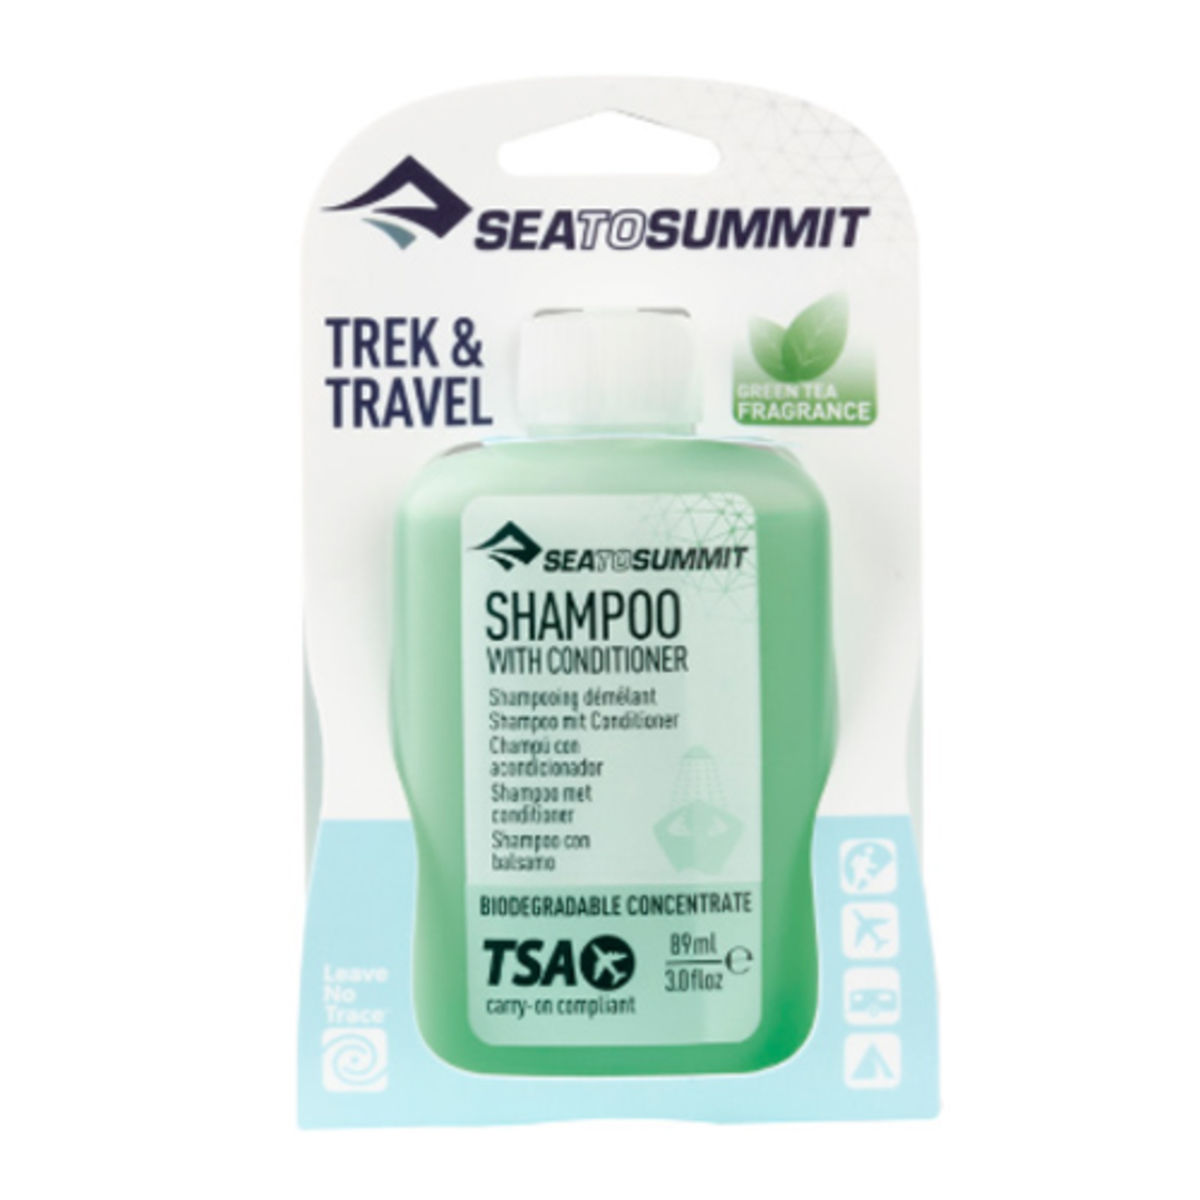 Sea to Summit biodegradable concentrate shampoo with conditioner